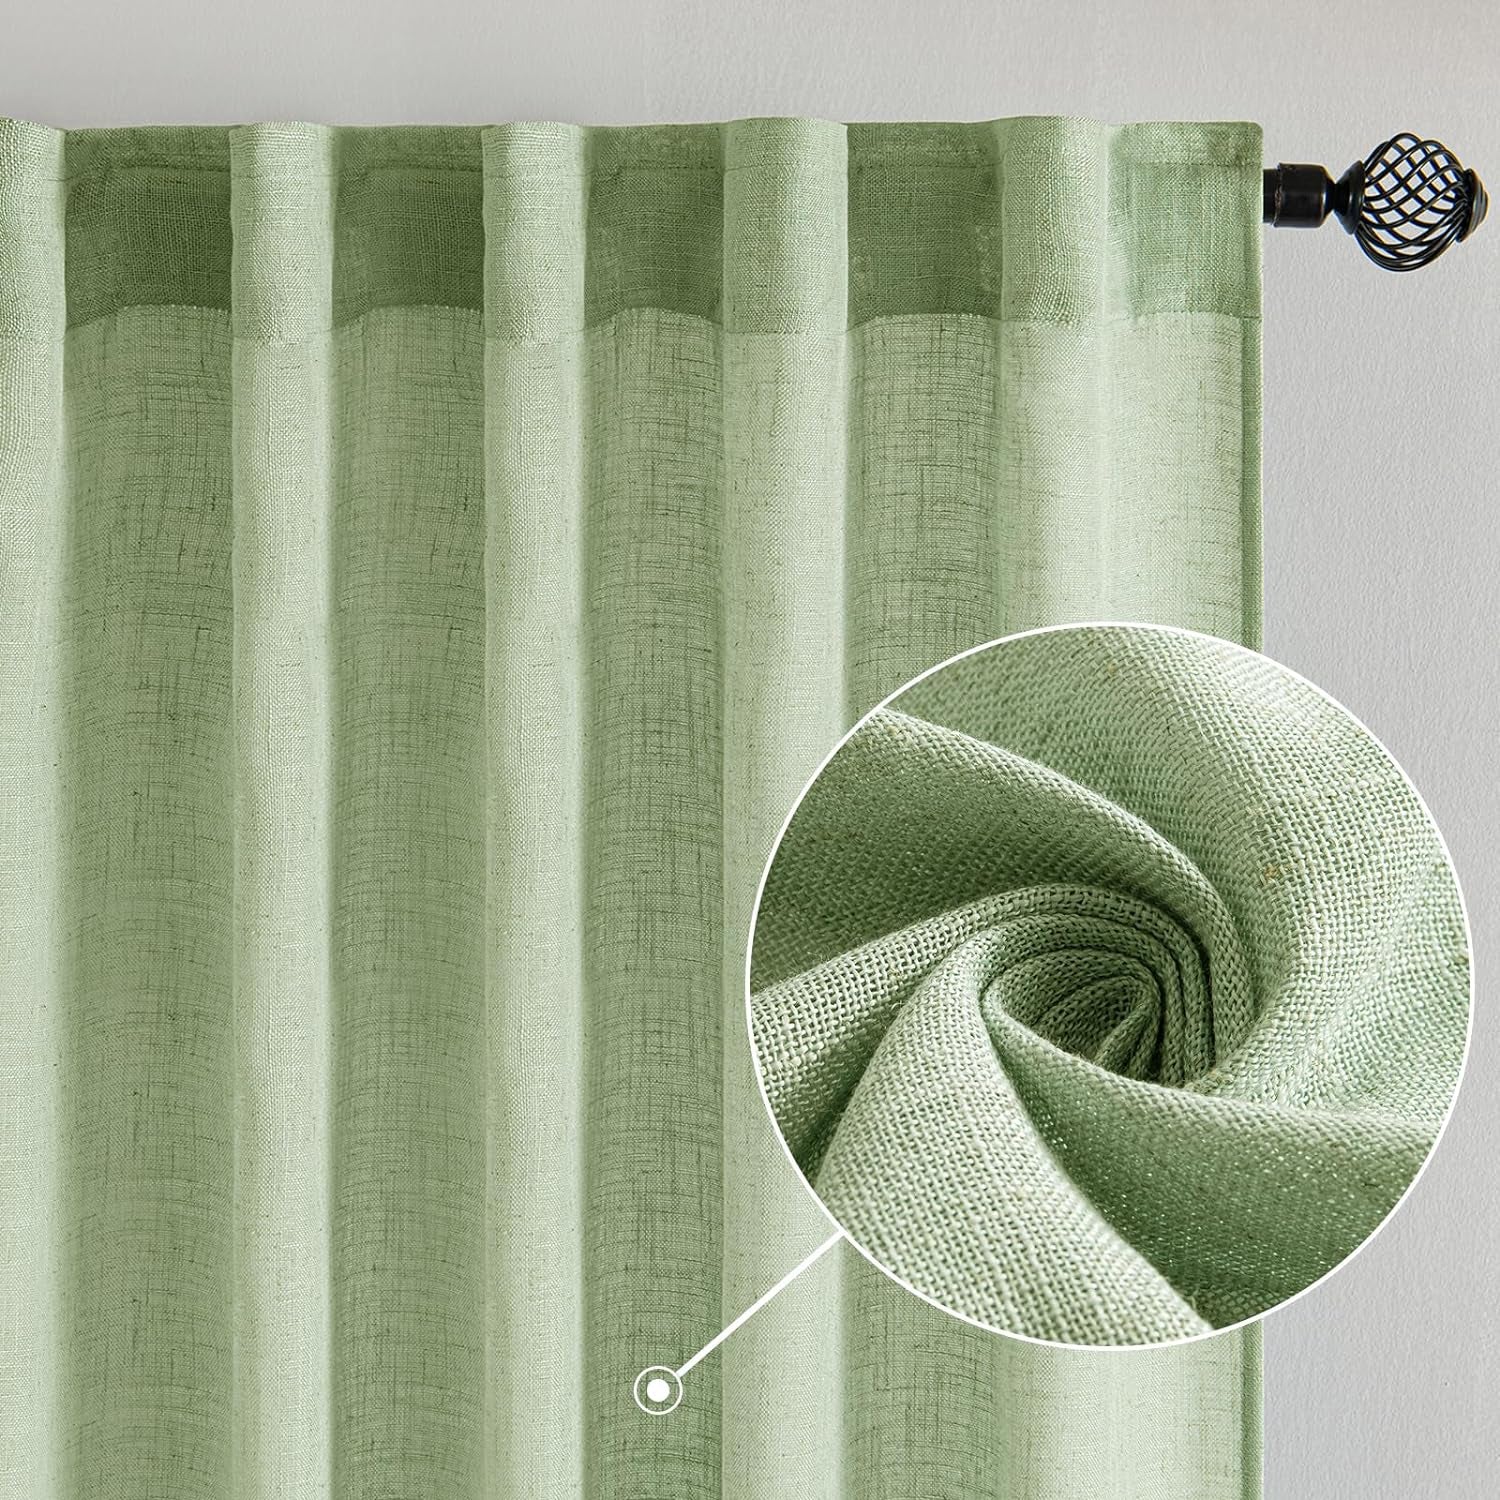 MIULEE Sage Green Linen Curtains 84 Inch Length for Bedroom Living Room Soft Linen Textured Window Drapes Semi Sheer Light Filtering Back Tab Rod Pocket 2 Panels Bundle Pinch Pleated Curtains 2 Panels  MIULEE   